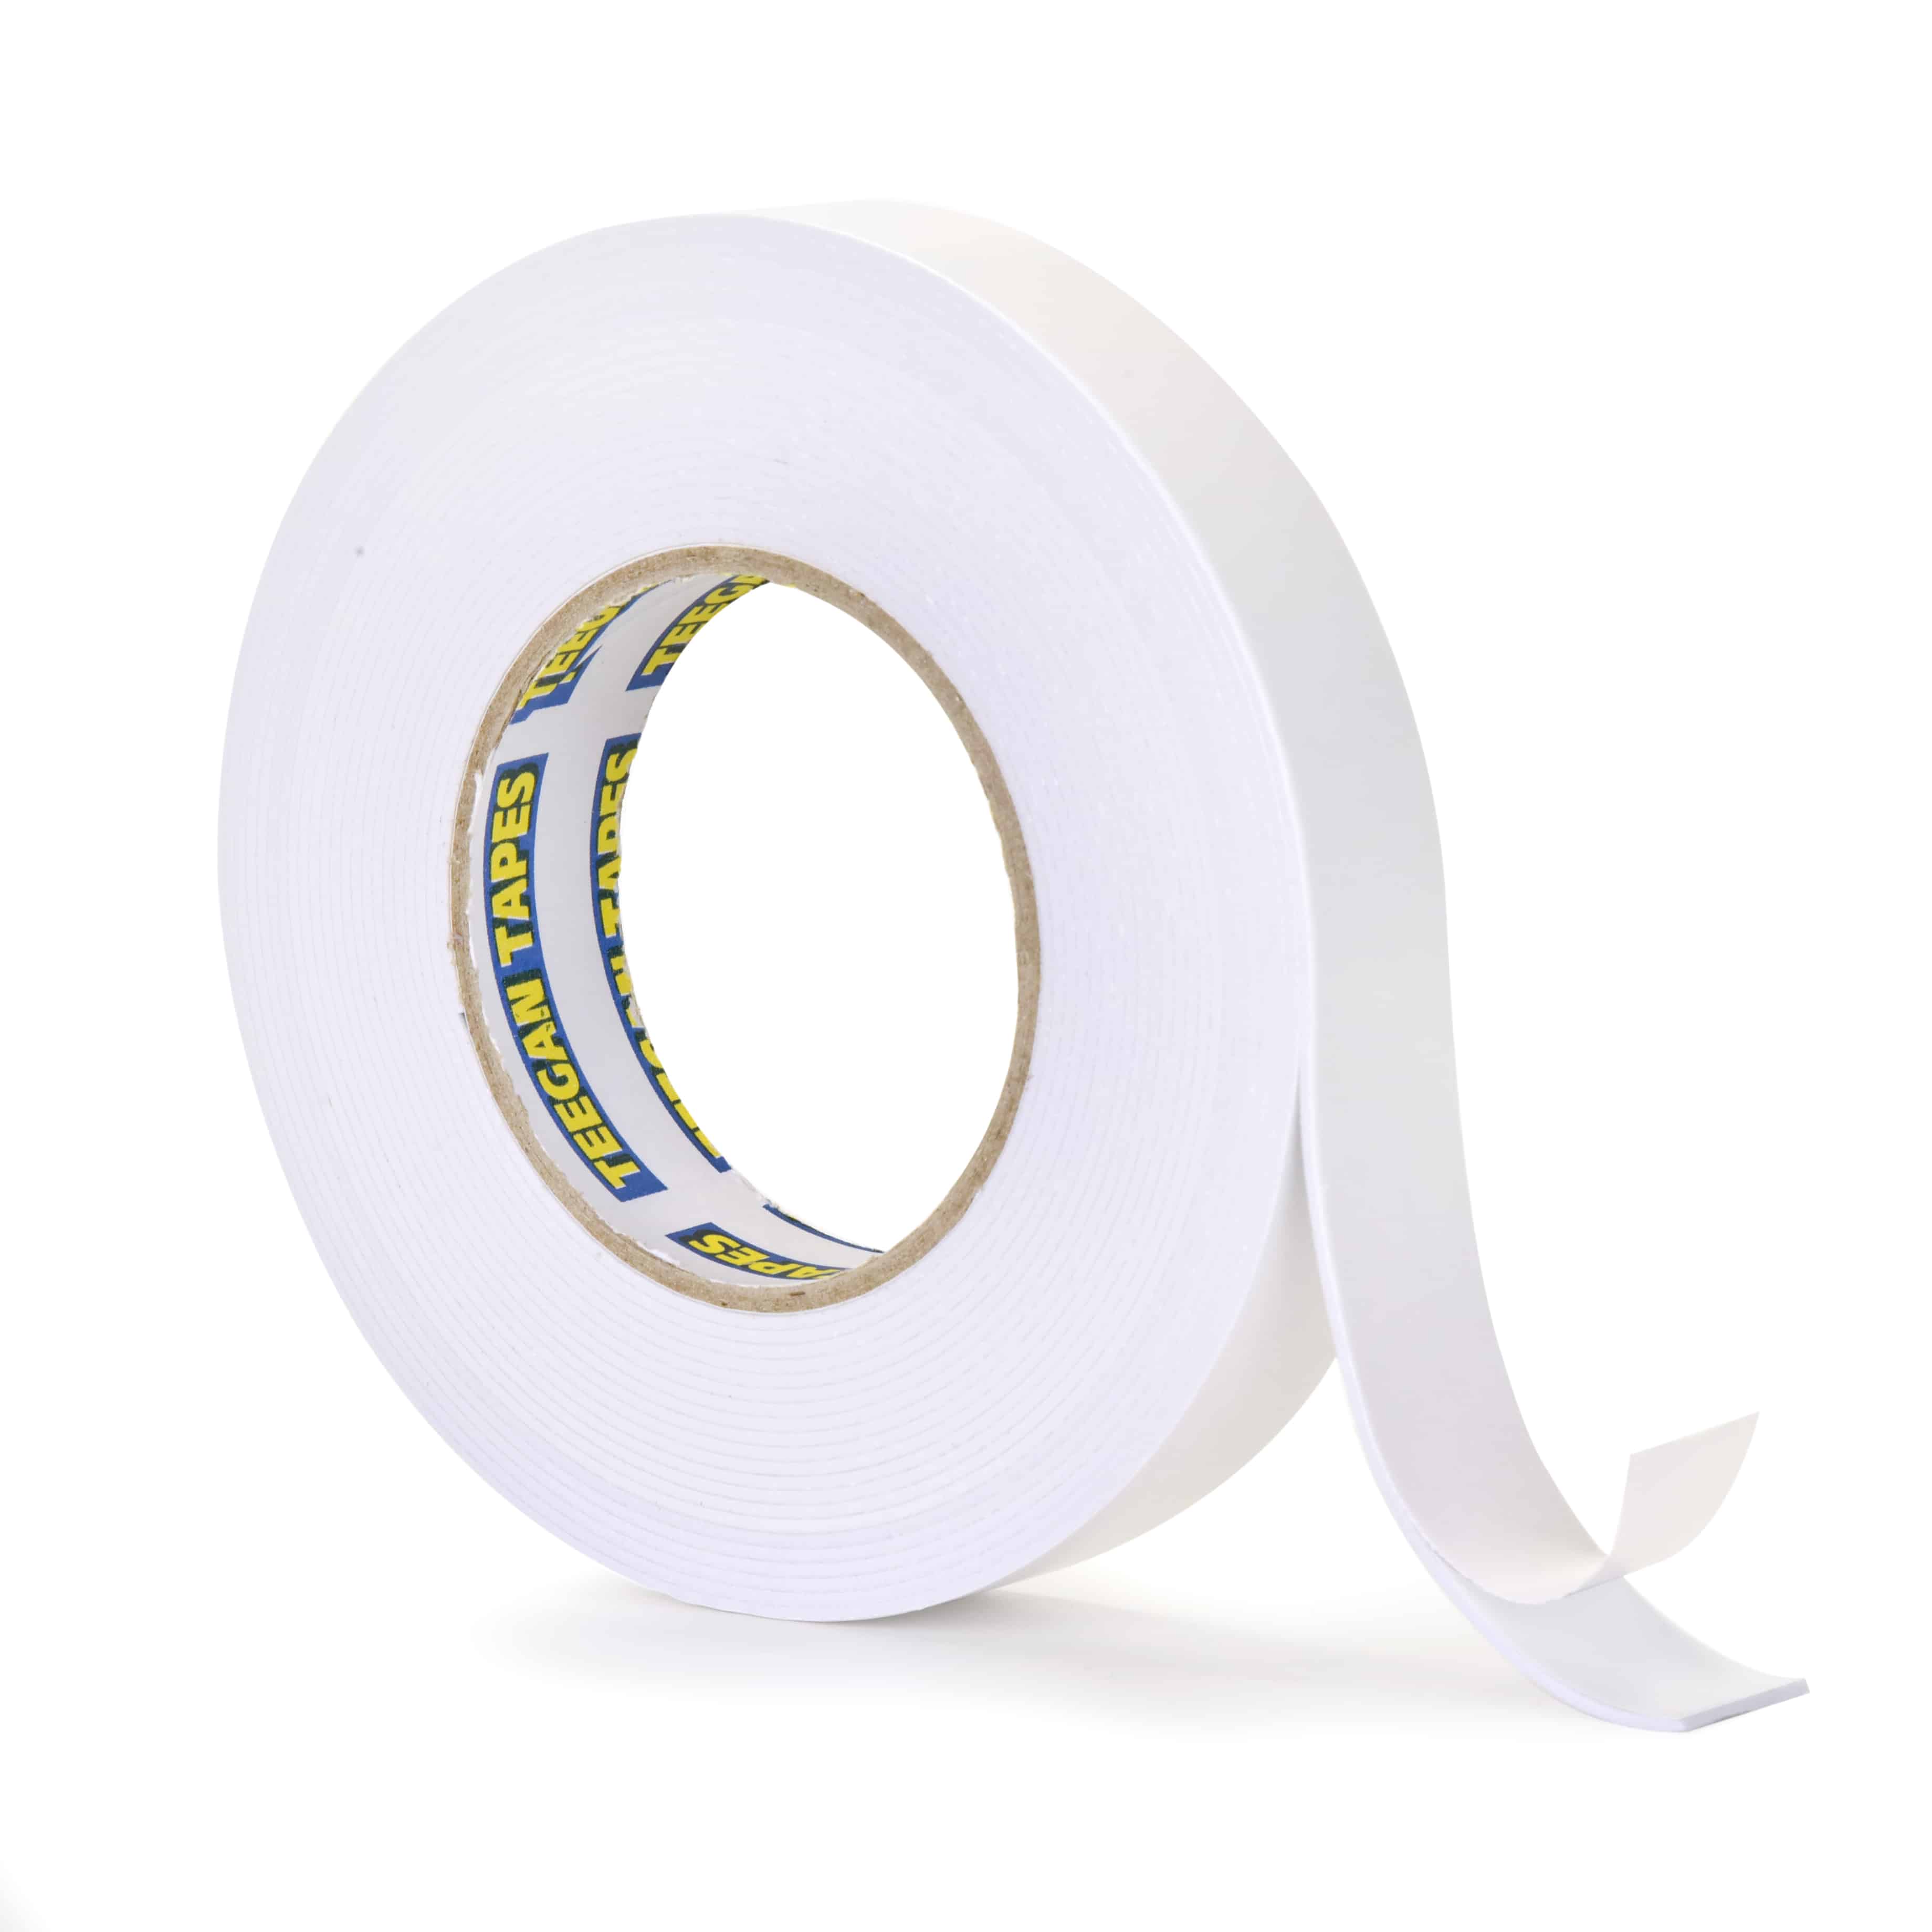 Double Sided White PE Foam Tape, Outdoor and Indoor Use, 1-inch x 27 F –  Gaffer Power